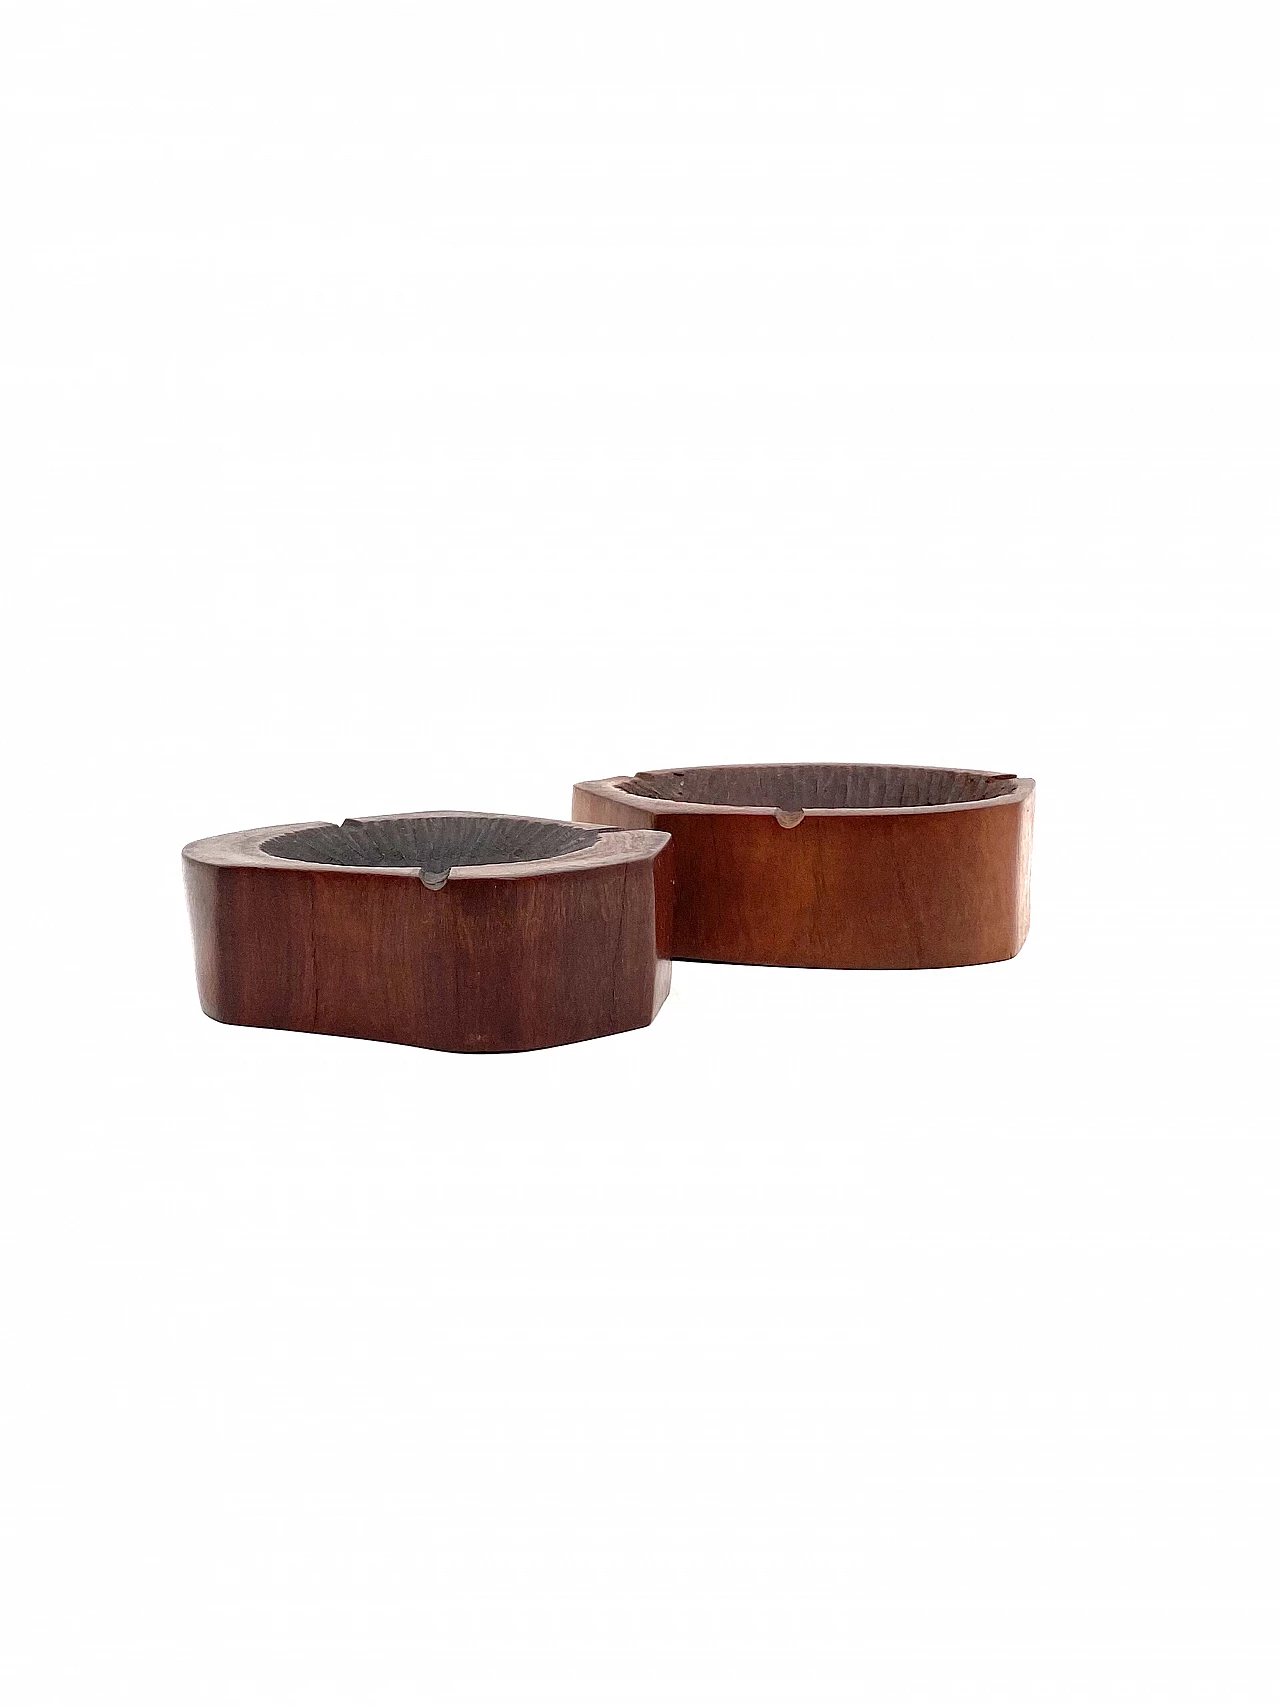 Pair of wooden ashtrays in Monique Gerber's style, 1970s 10